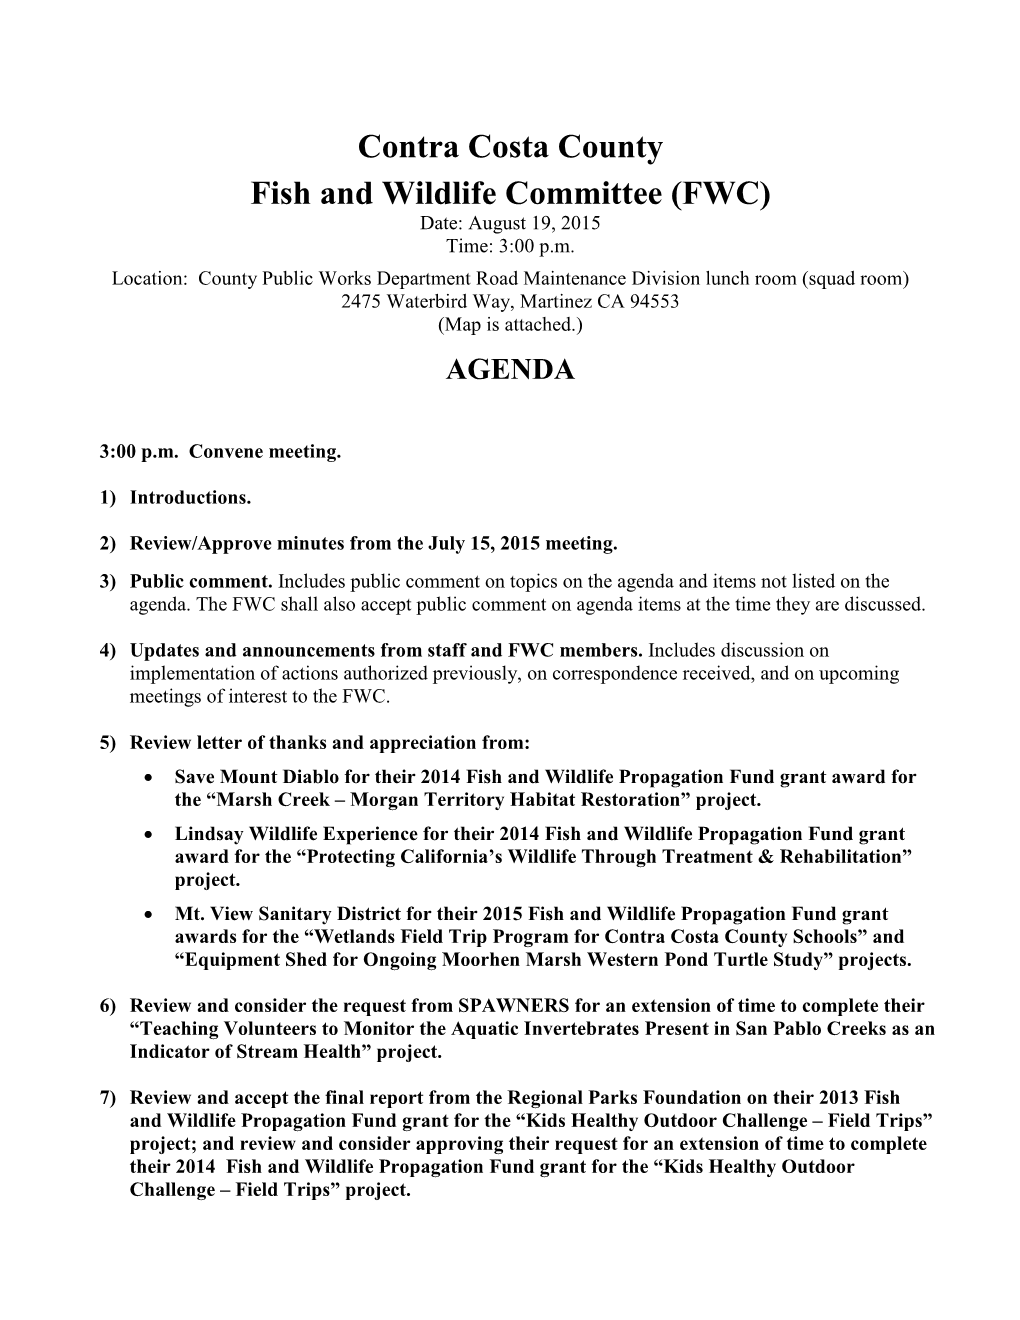 Contra Costa County Fish and Wildlife Committee (FWC) Date: August 19, 2015 Time: 3:00 P.M